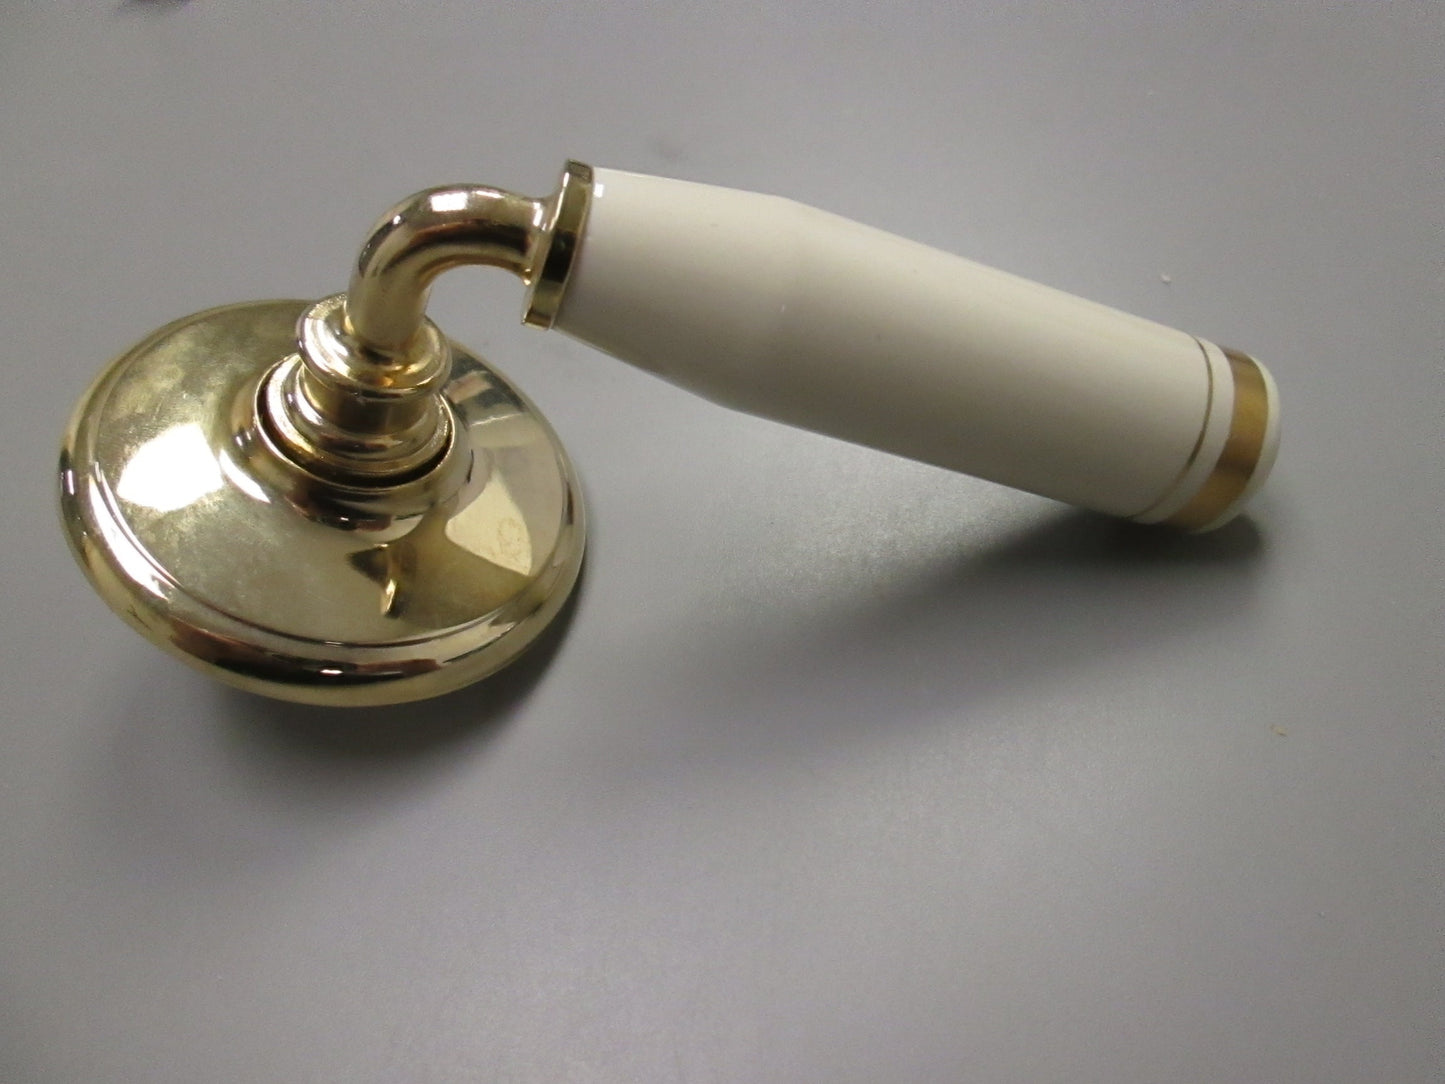 Gainsborough 80 Series Passage Set with Buckingham (ivory porcelain) and Polished Brass Rose.